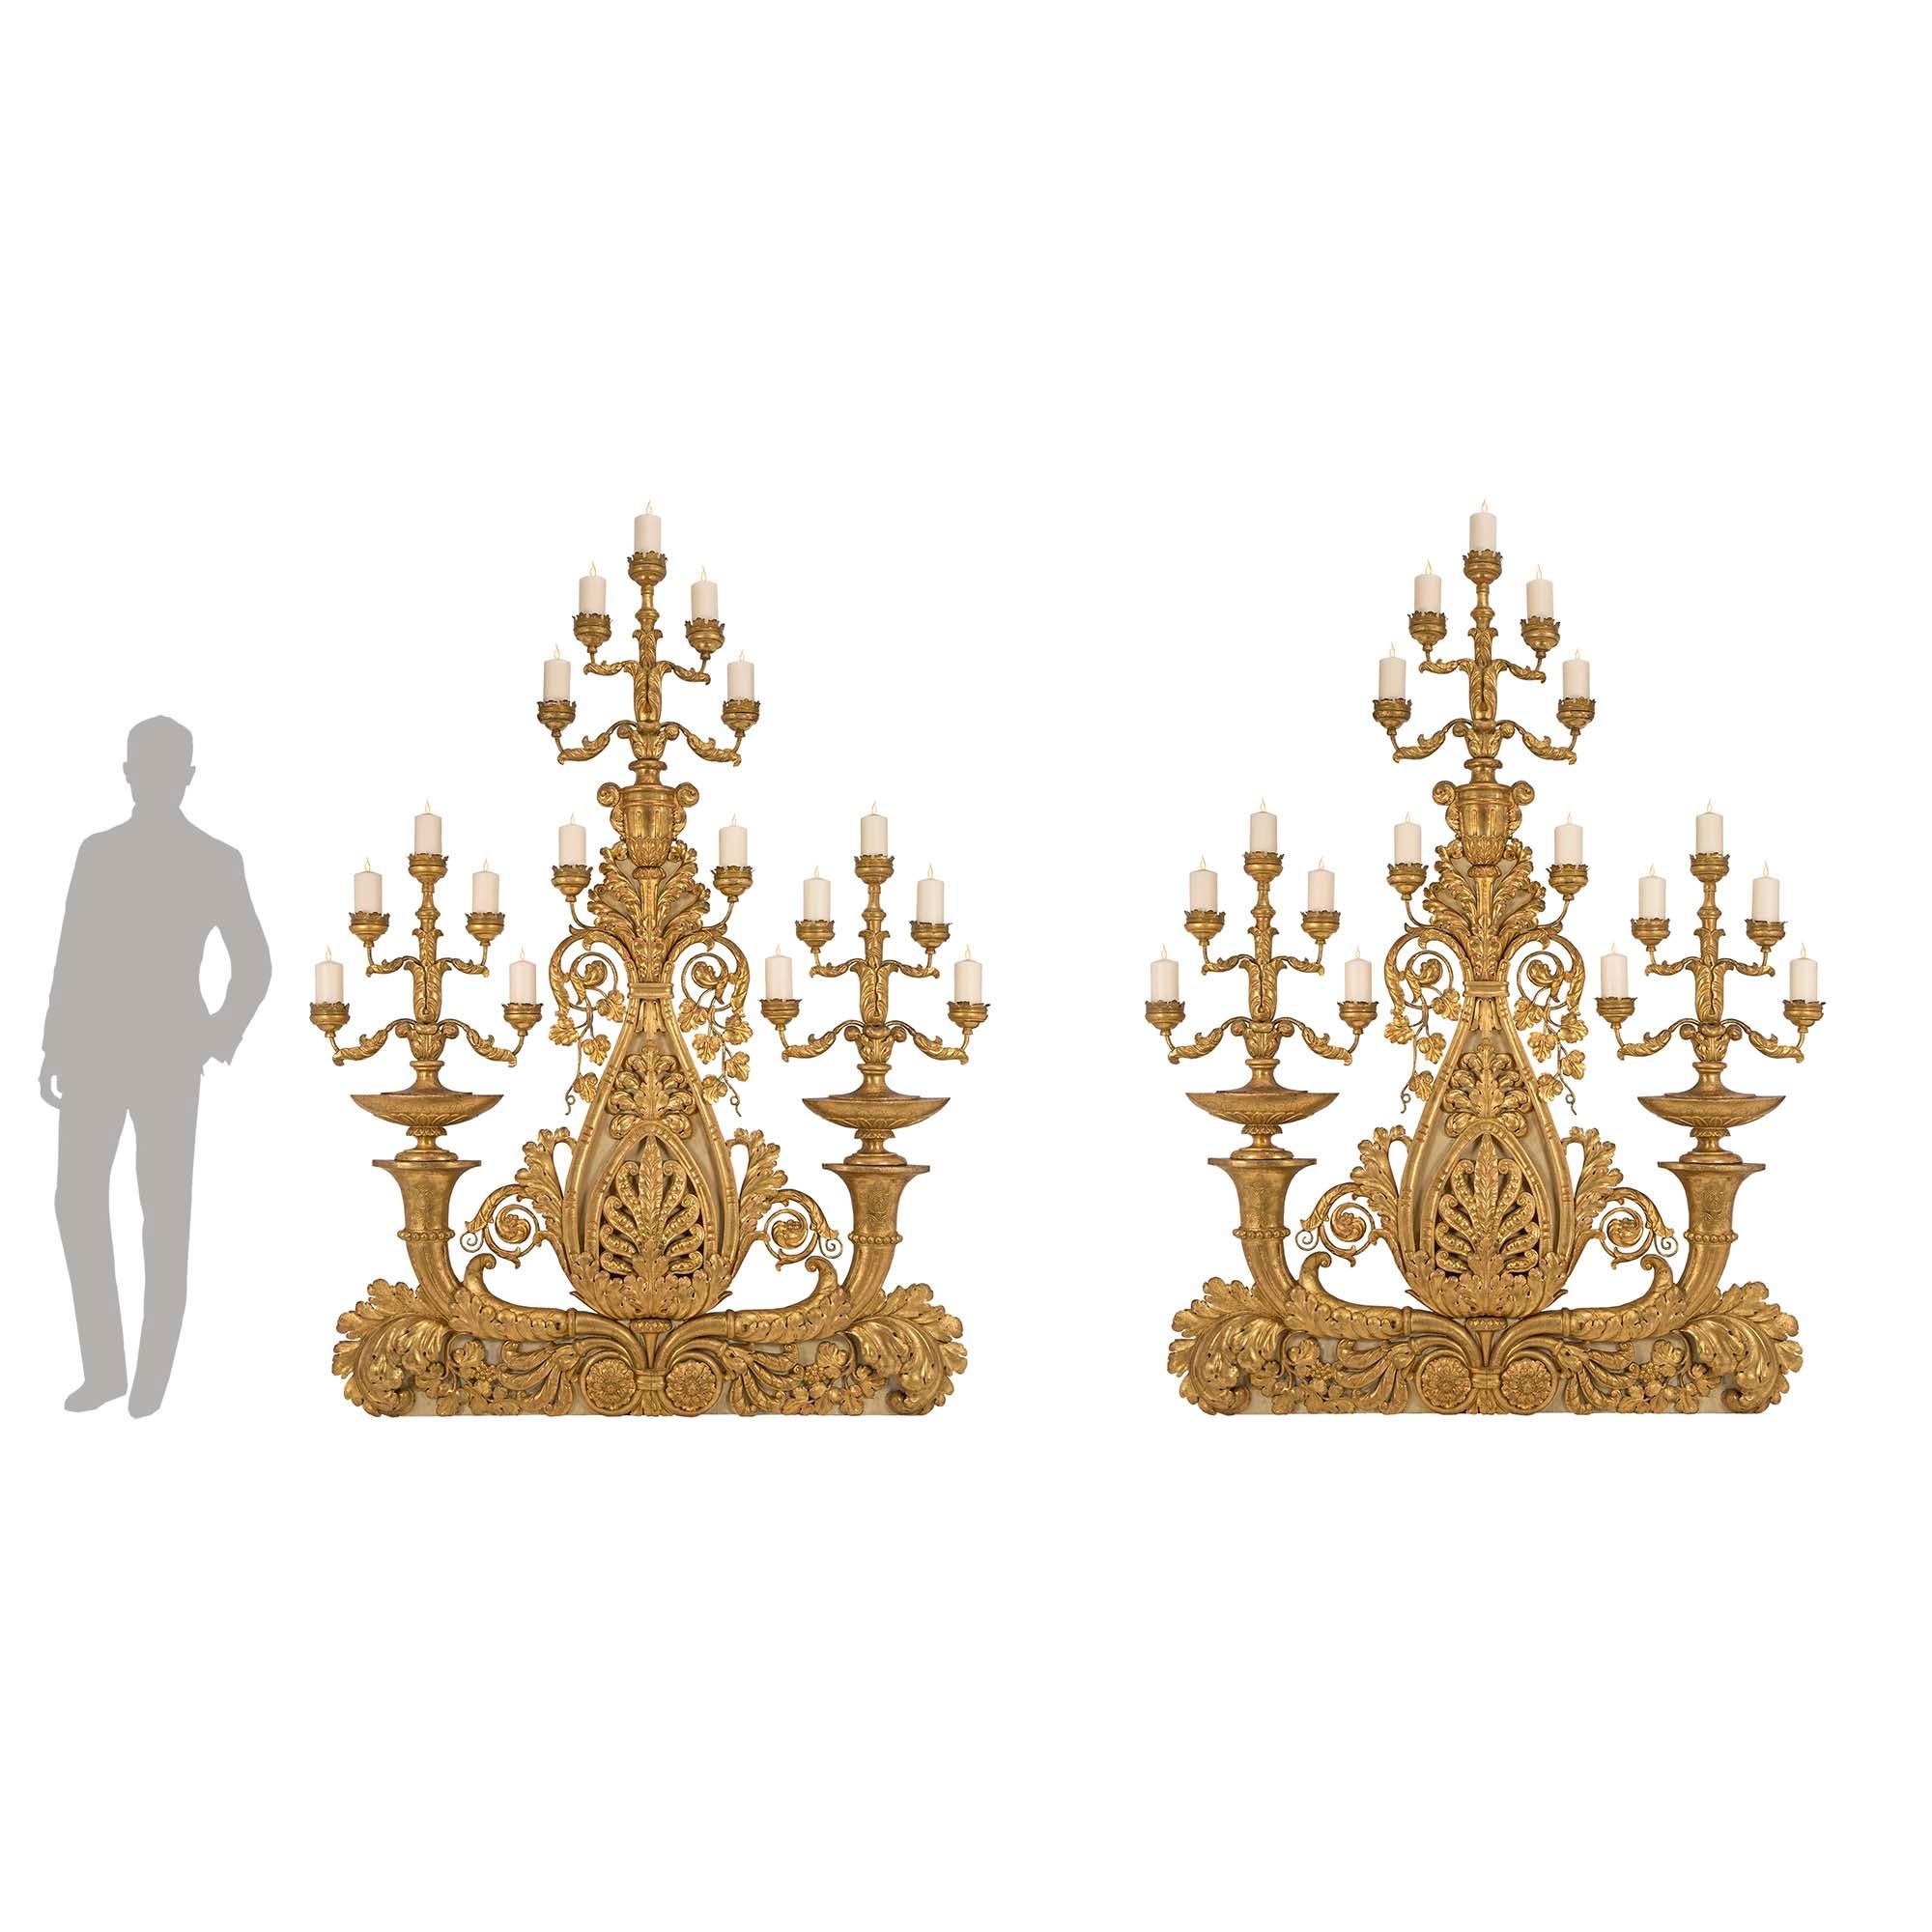 A stunning and extremely unique pair of Italian Mid 18th century monumental giltwood and gilt metal candelabras, from Tuscany. Each large scale candelabra is raised on a patinated plinth decorated with opulent and finely carved giltwood scrolled